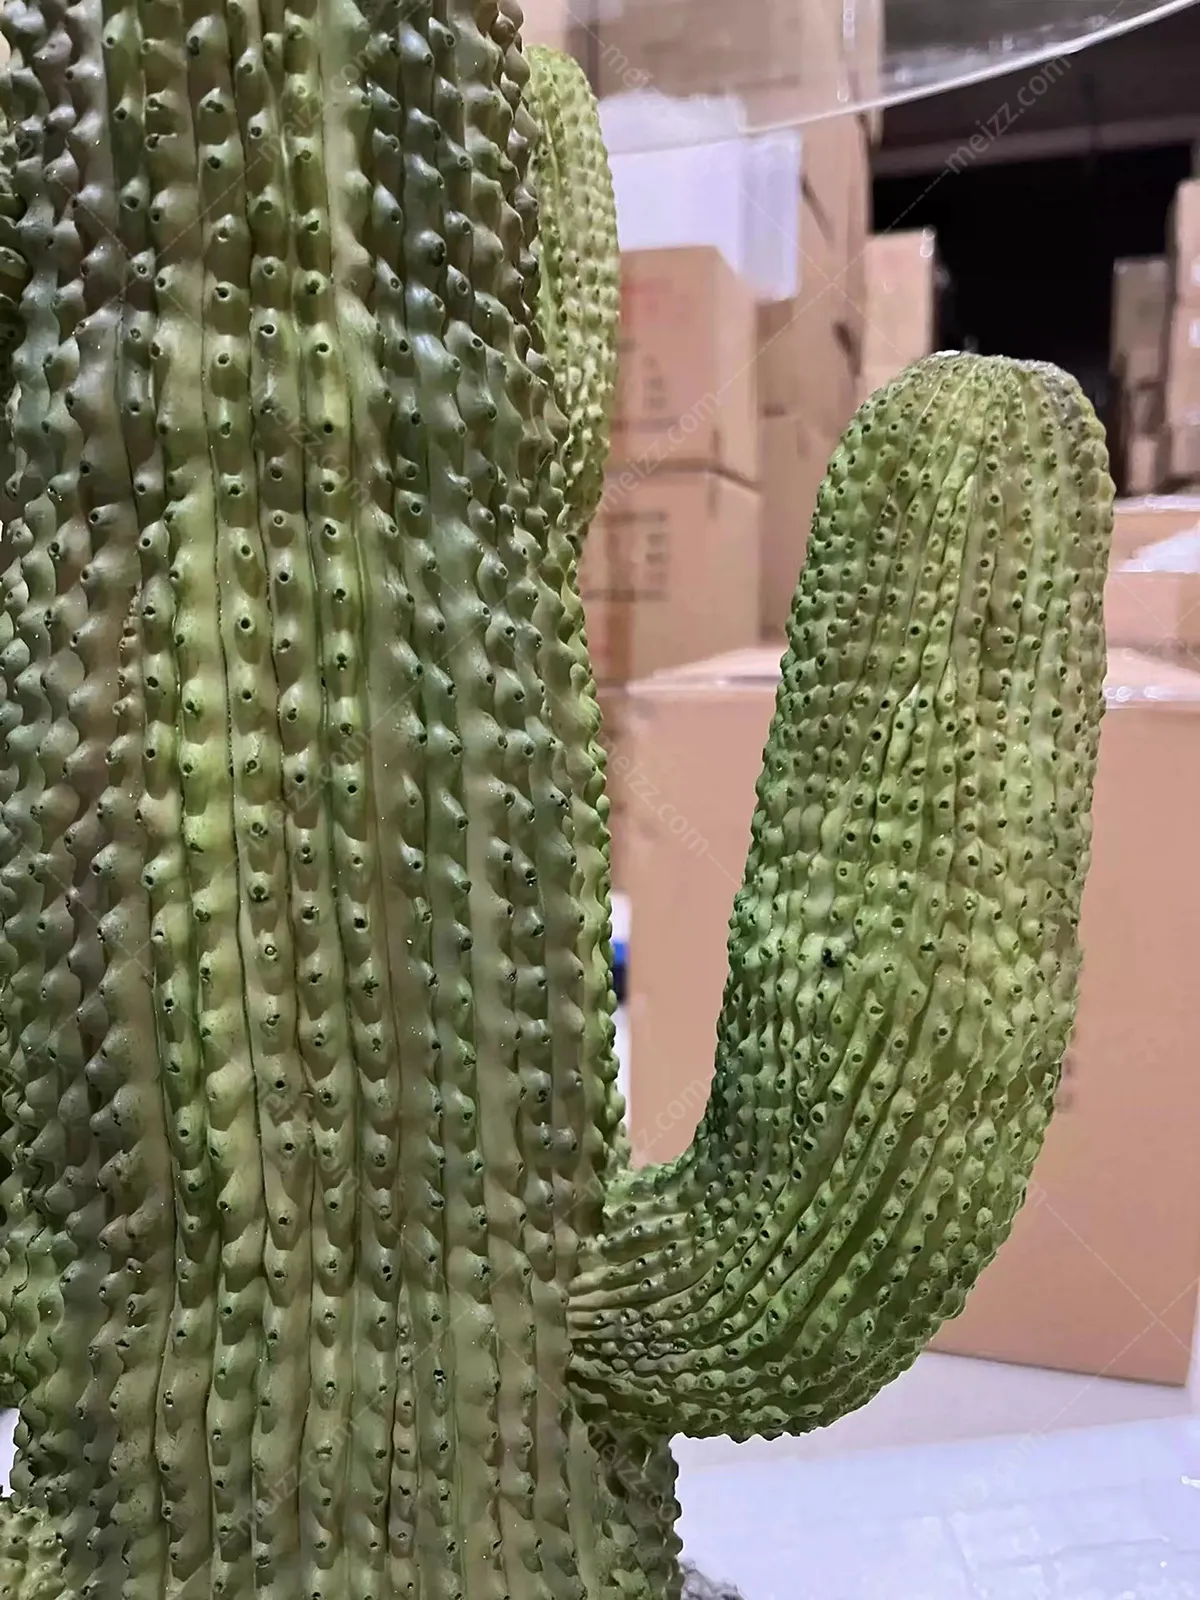 cactus side table